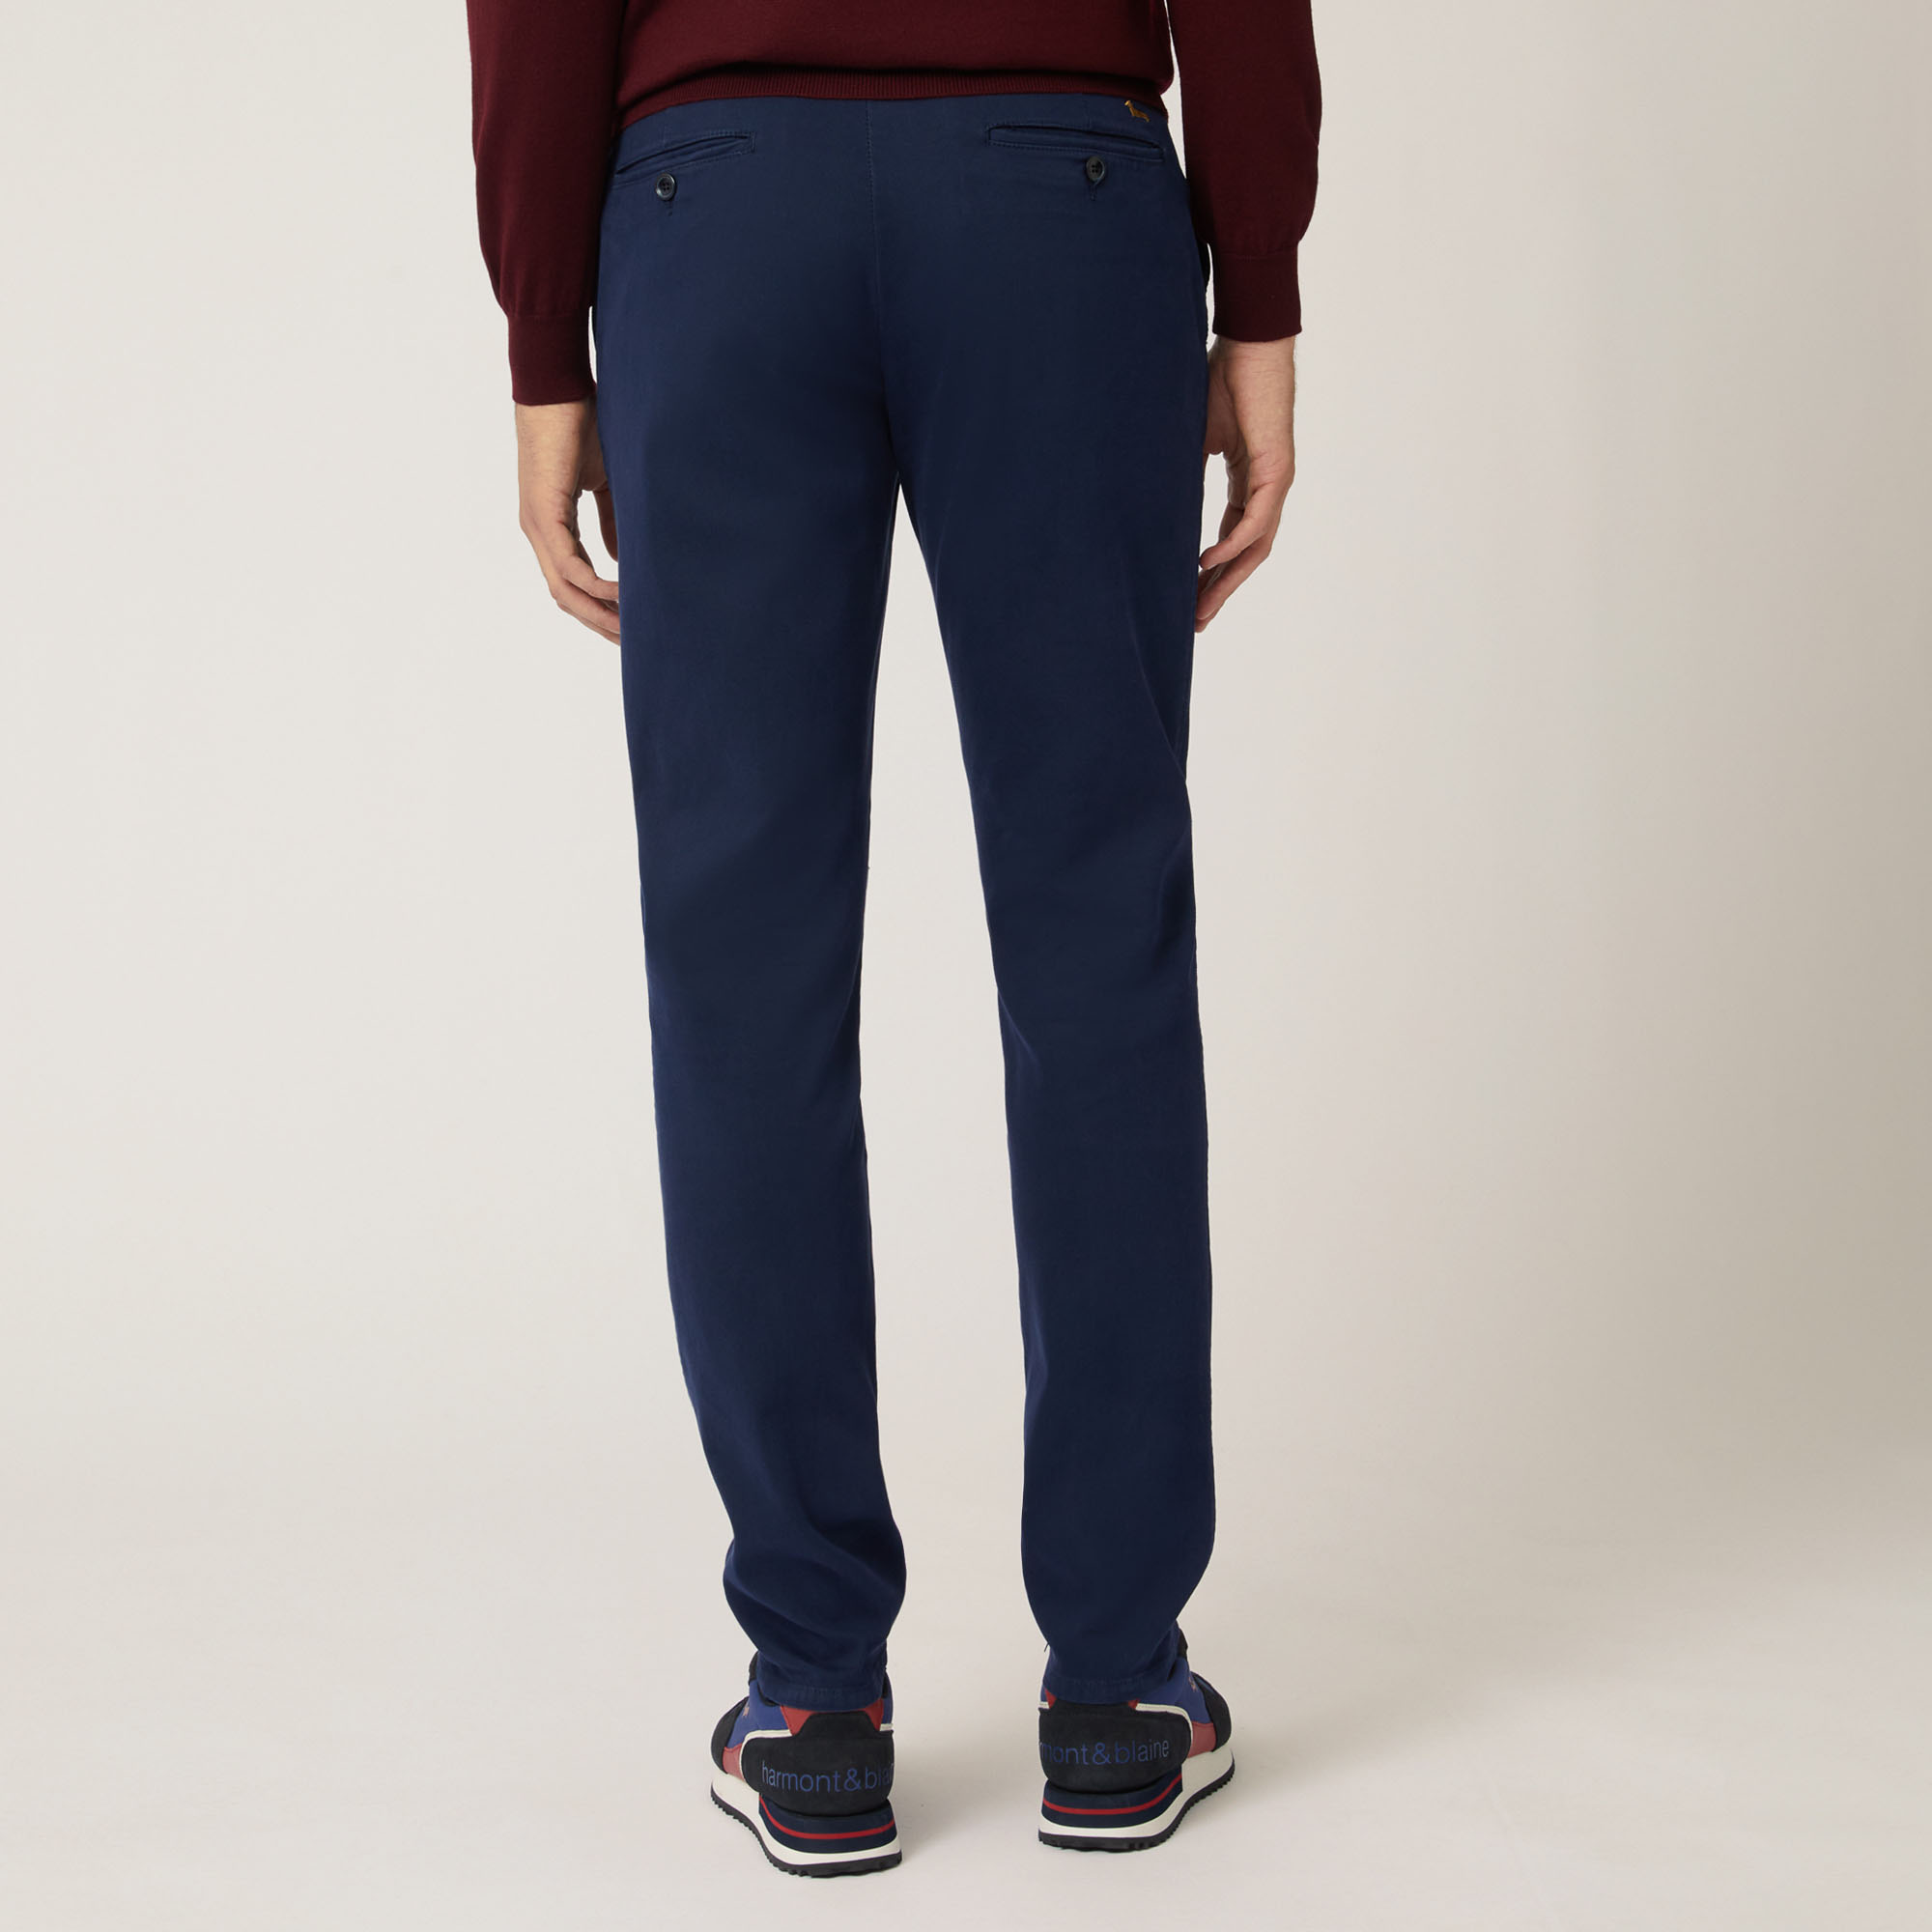 Pantalone Chino Narrow In Cotone Stretch, Blu Navy, large image number 1